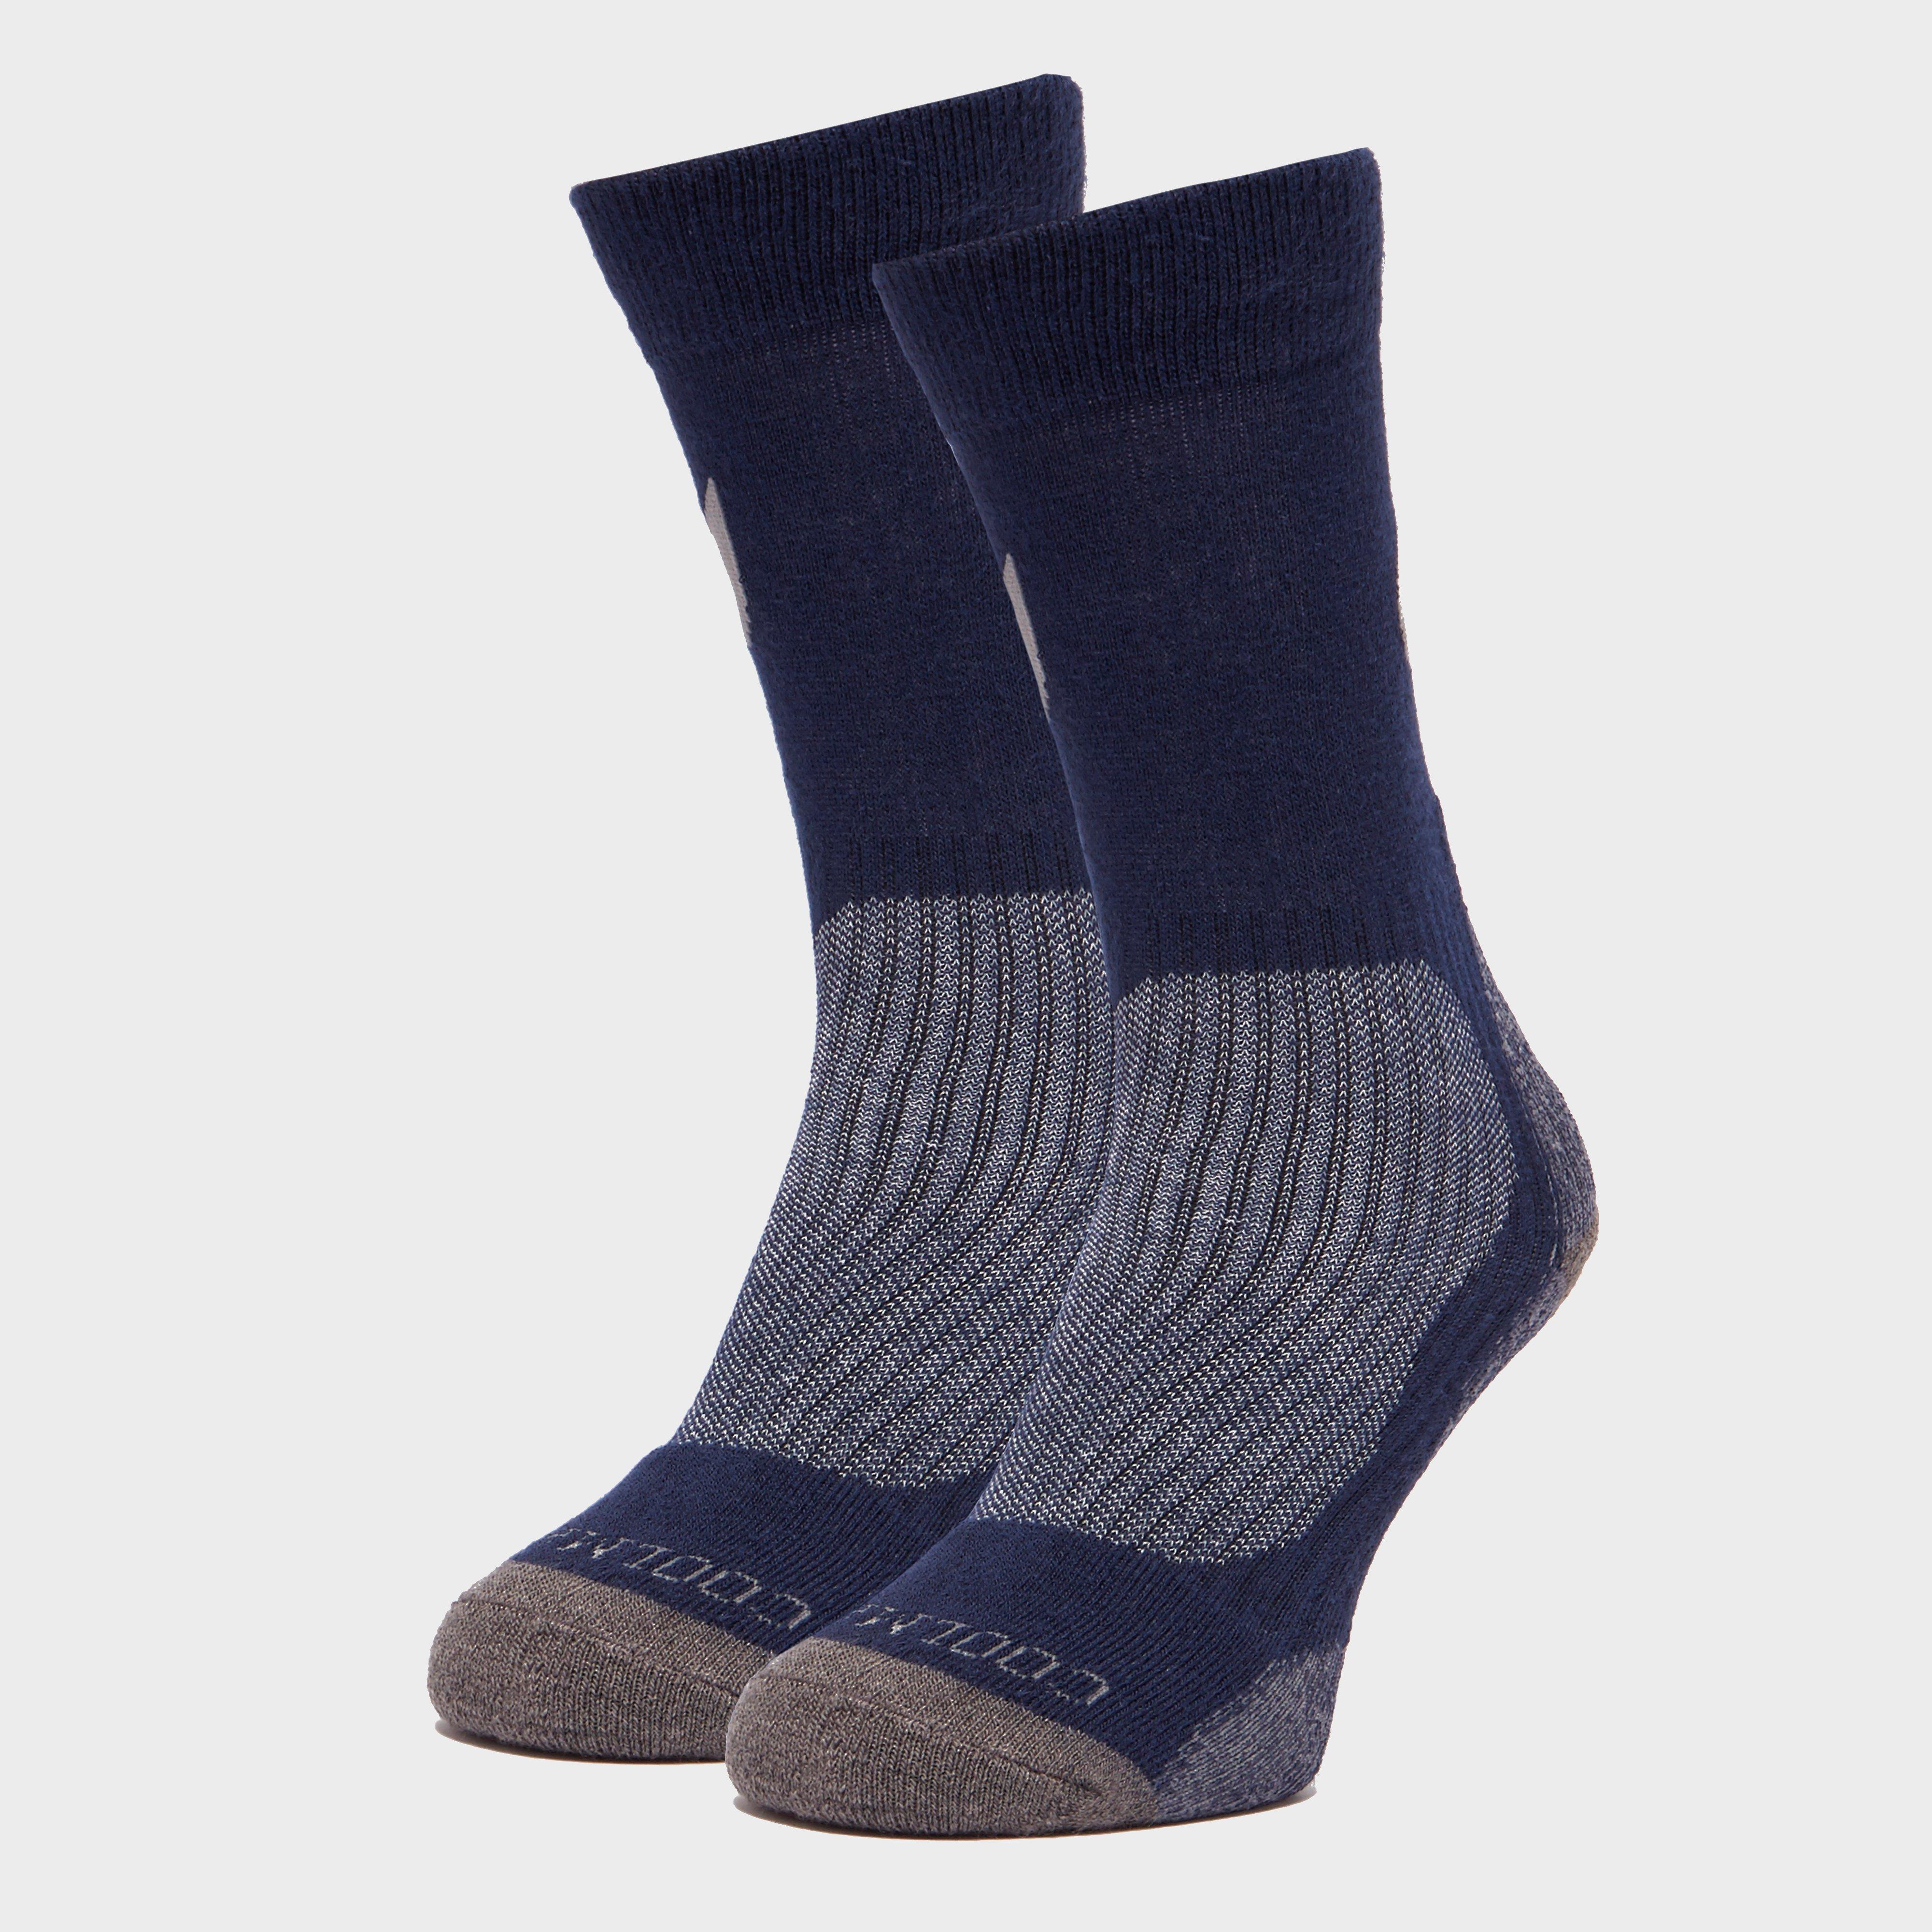 Peter Storm Lightweight Outdoor Socks - 2 Pack - Navy/nvy  Navy/nvy